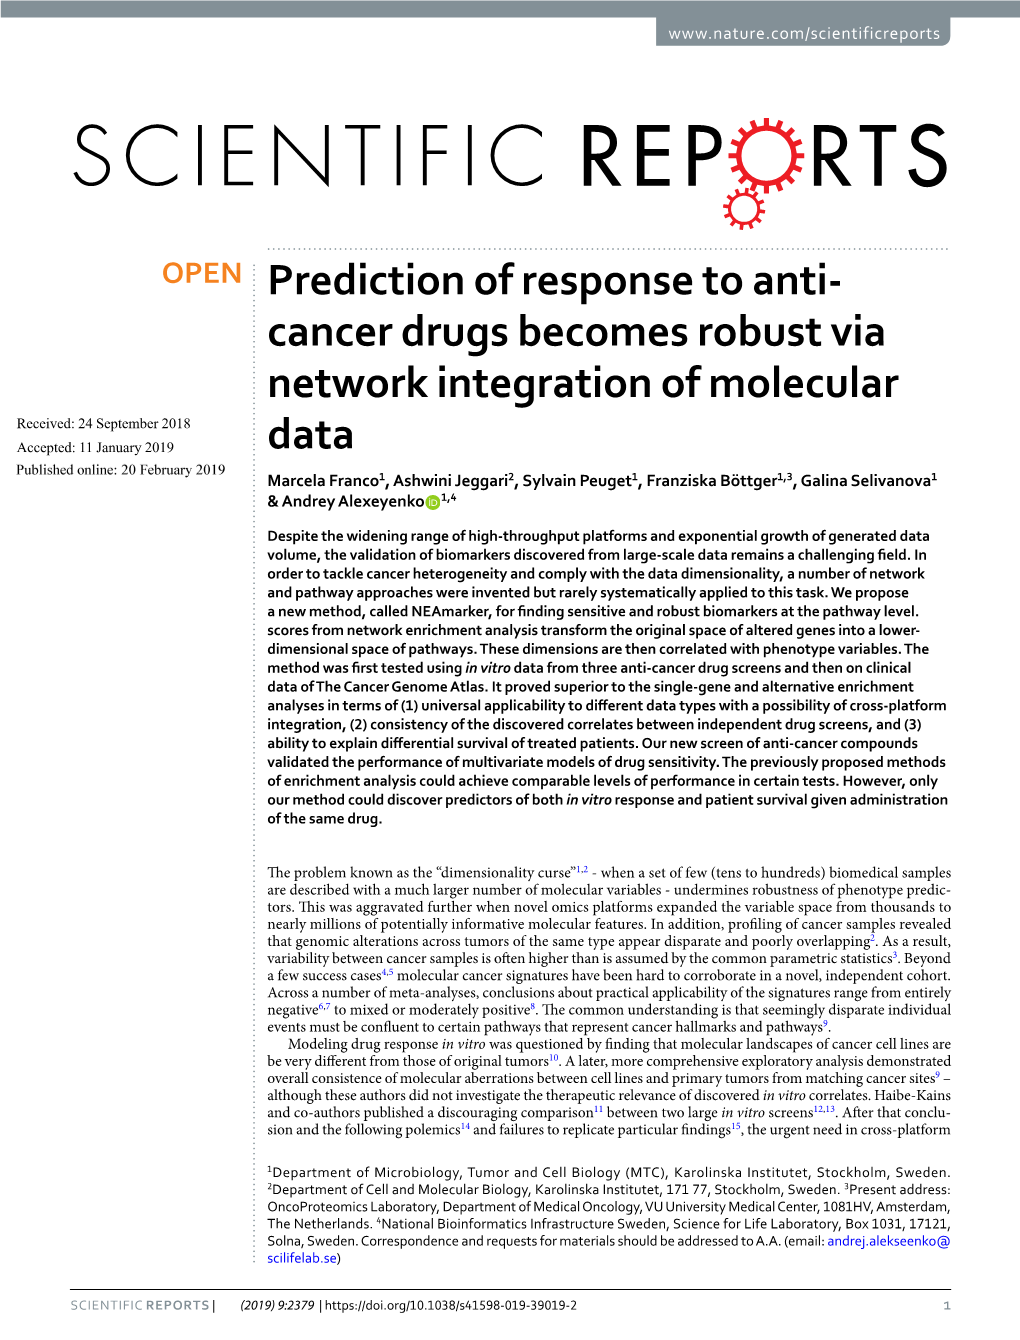 Prediction of Response to Anti-Cancer Drugs Becomes Robust Via Network